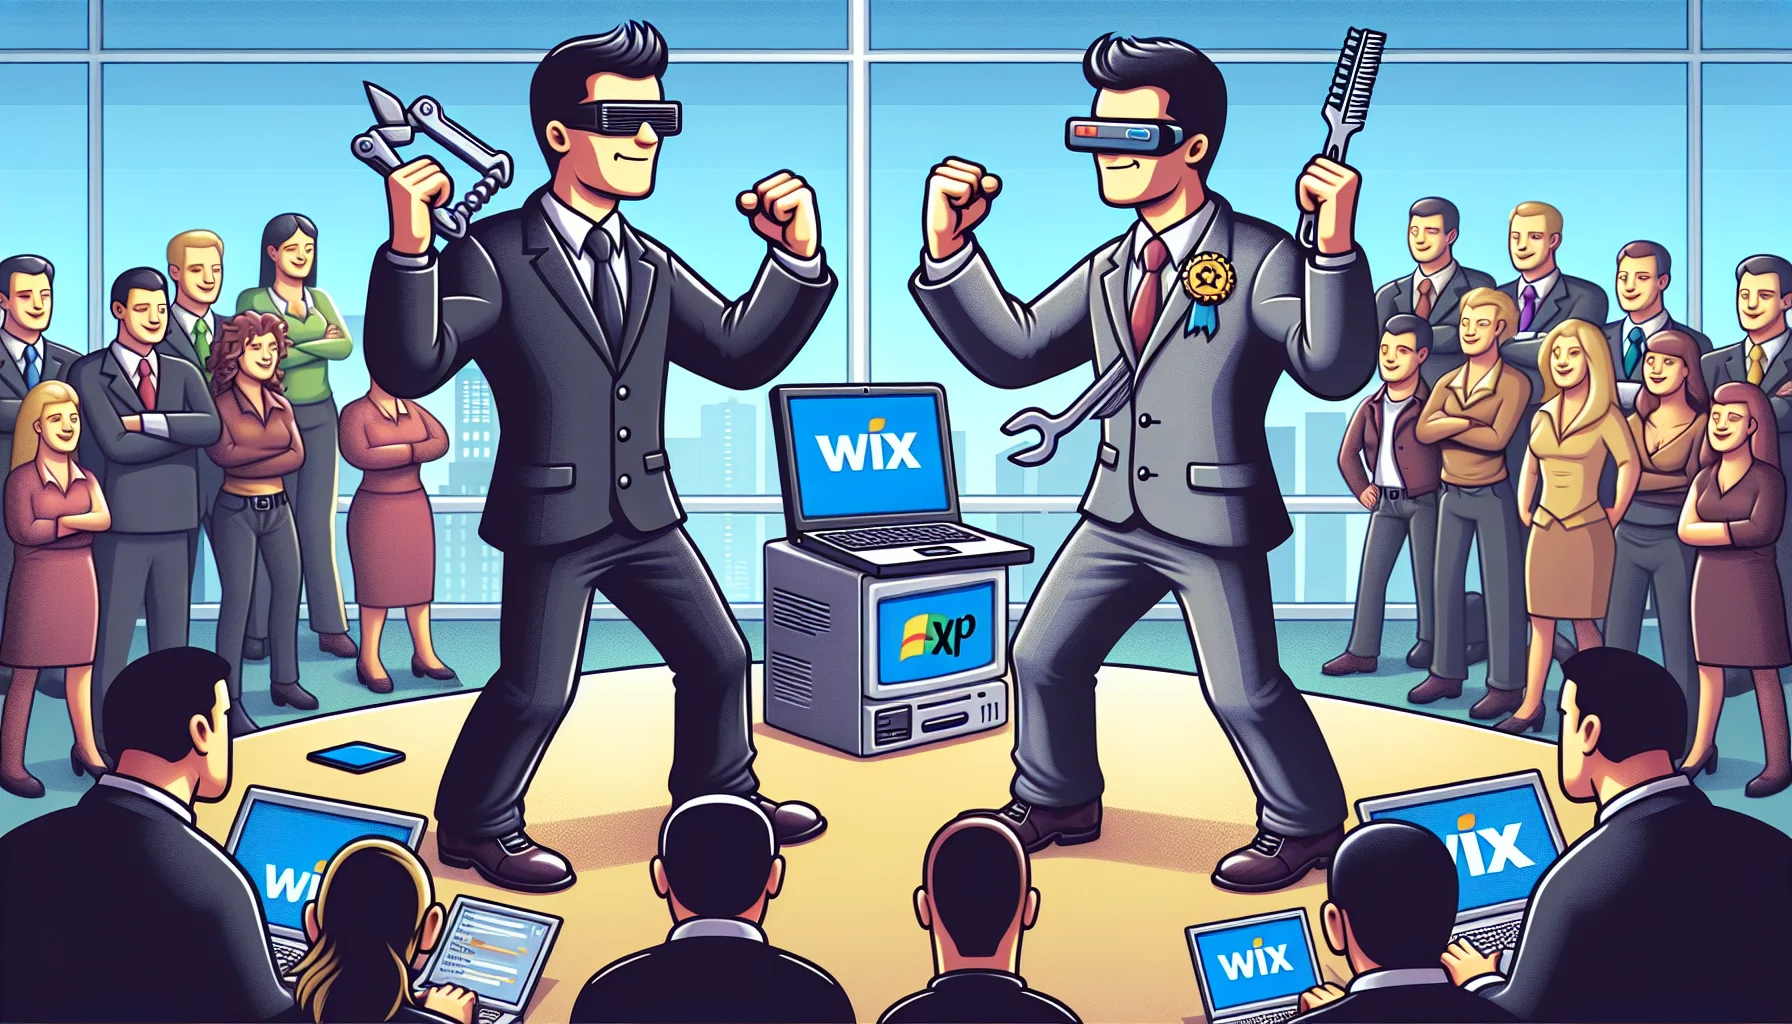 Design a humorous scene where two personified versions of web hosting platforms are competing. On one side, personify 'Wix' as a slick, modern professional in a sharp suit using advanced tools, symbolizing the powerful and user-friendly nature of the platform. On the other side, transform 'Wix XP' into a retro character, wearing clothing styles of the early 2000s and using outdated tools, reflecting the older version of the platform. The backdrop should be an office setting, with people from various descents and genders watching the friendly competition, intrigued by the spectacle.